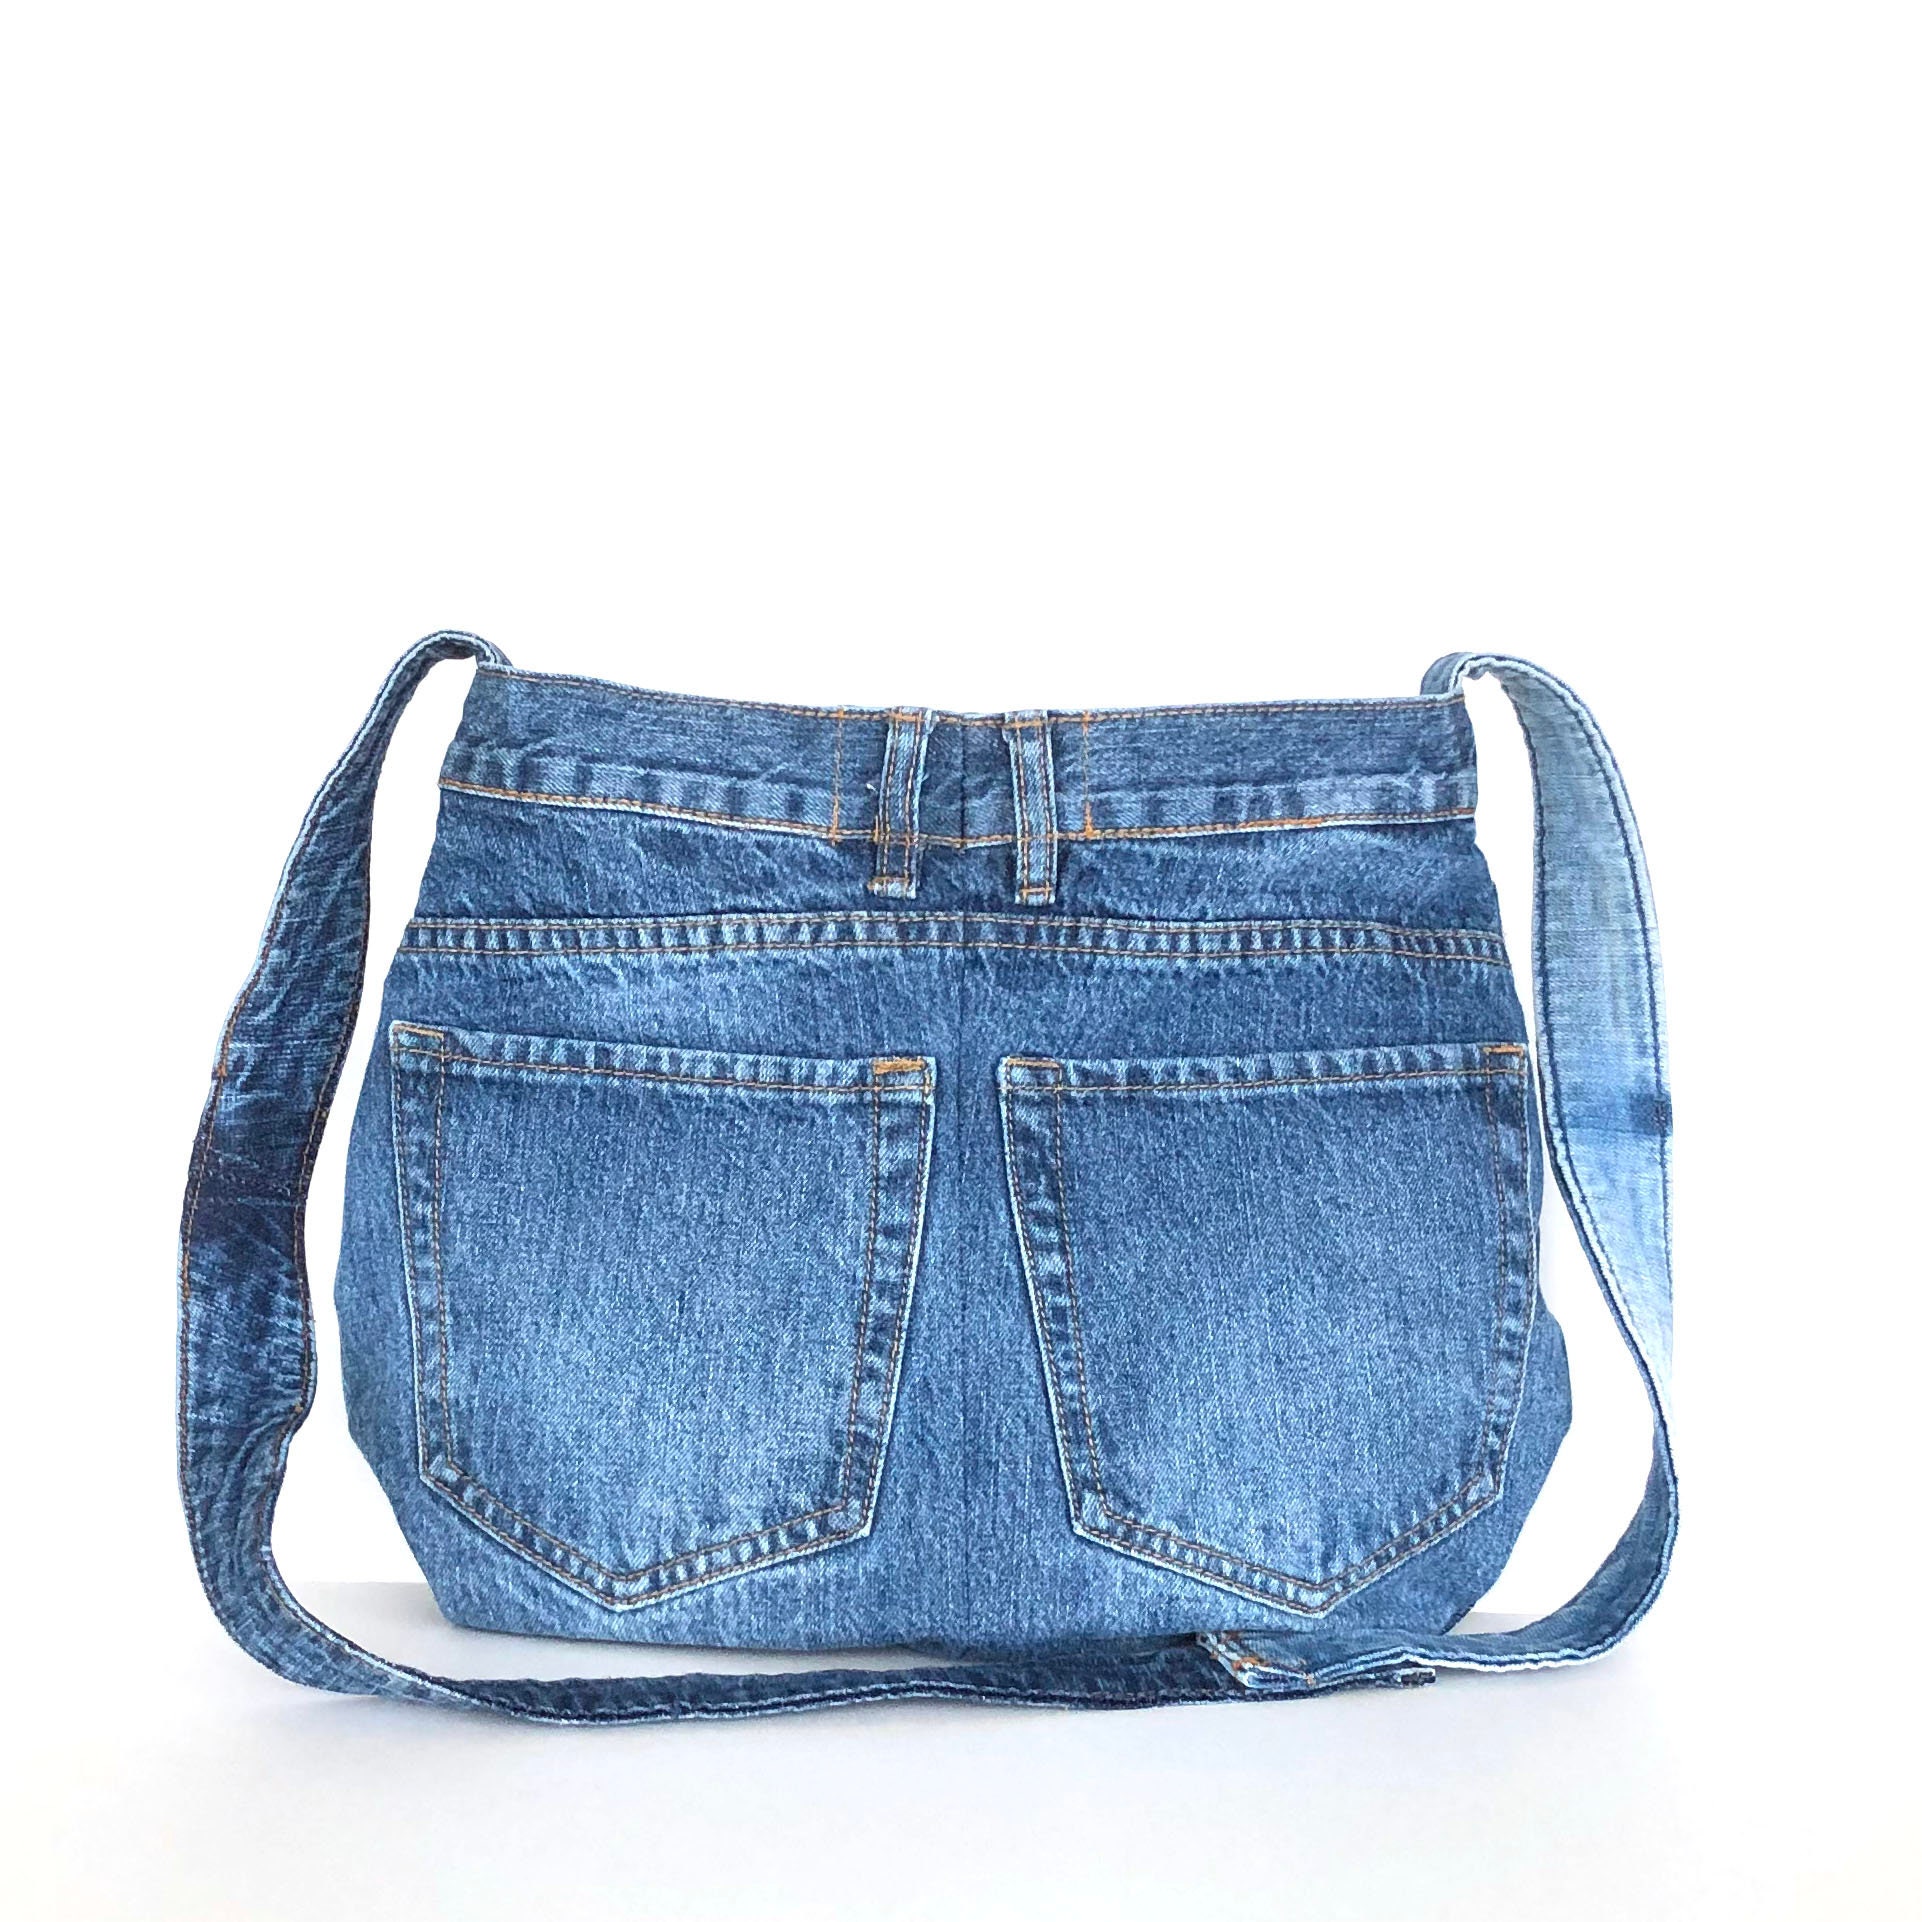 Blue Jeans Crossover Purse, Ethnic Crossbody Bag Women, Recycled Denim  Pocket Over Shoulder Pouch, Small Summer Travel Accessory